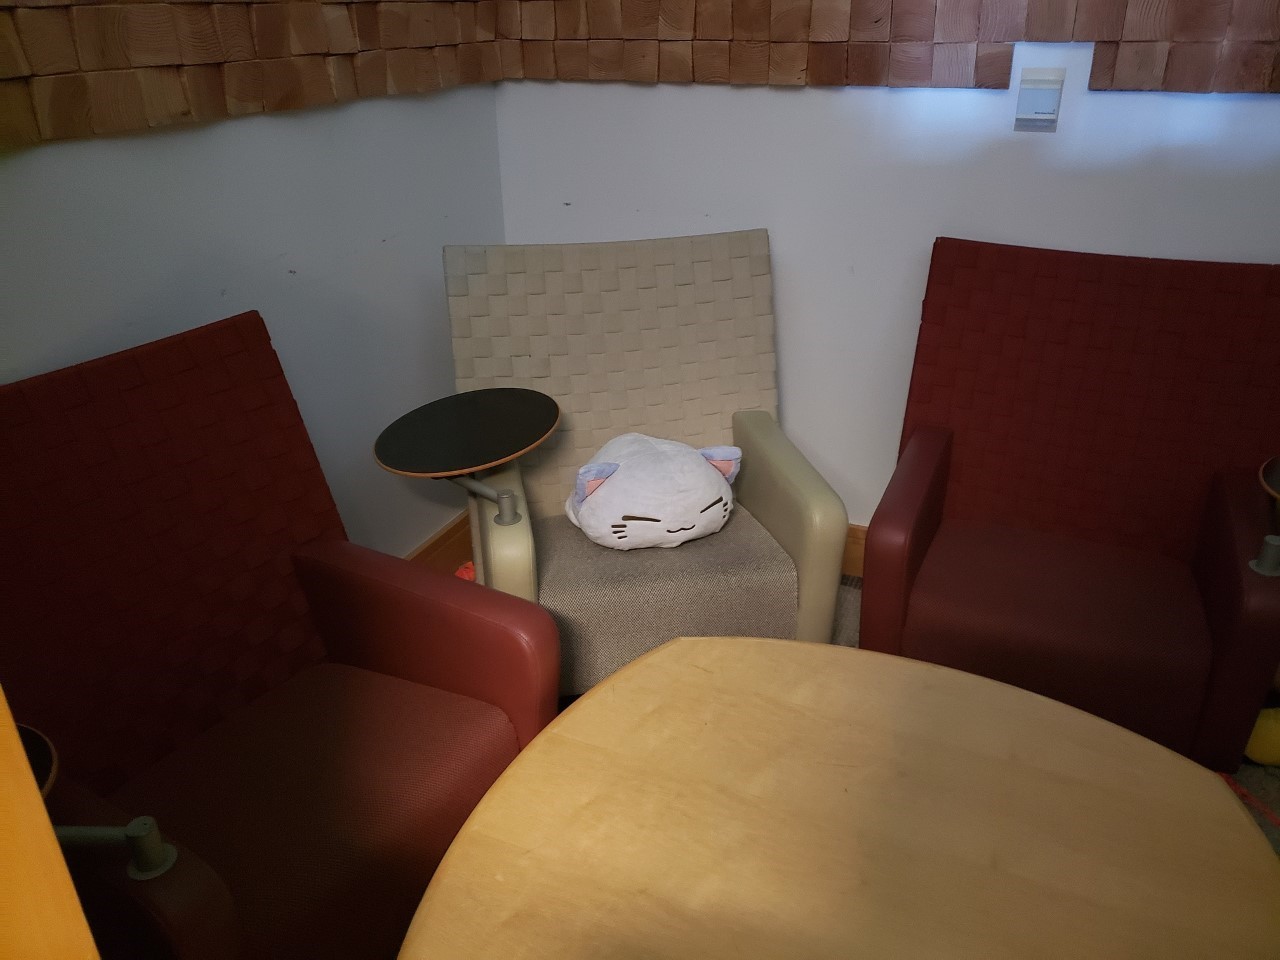 Three chairs, a table, and a cat-shaped pillow in a corner.